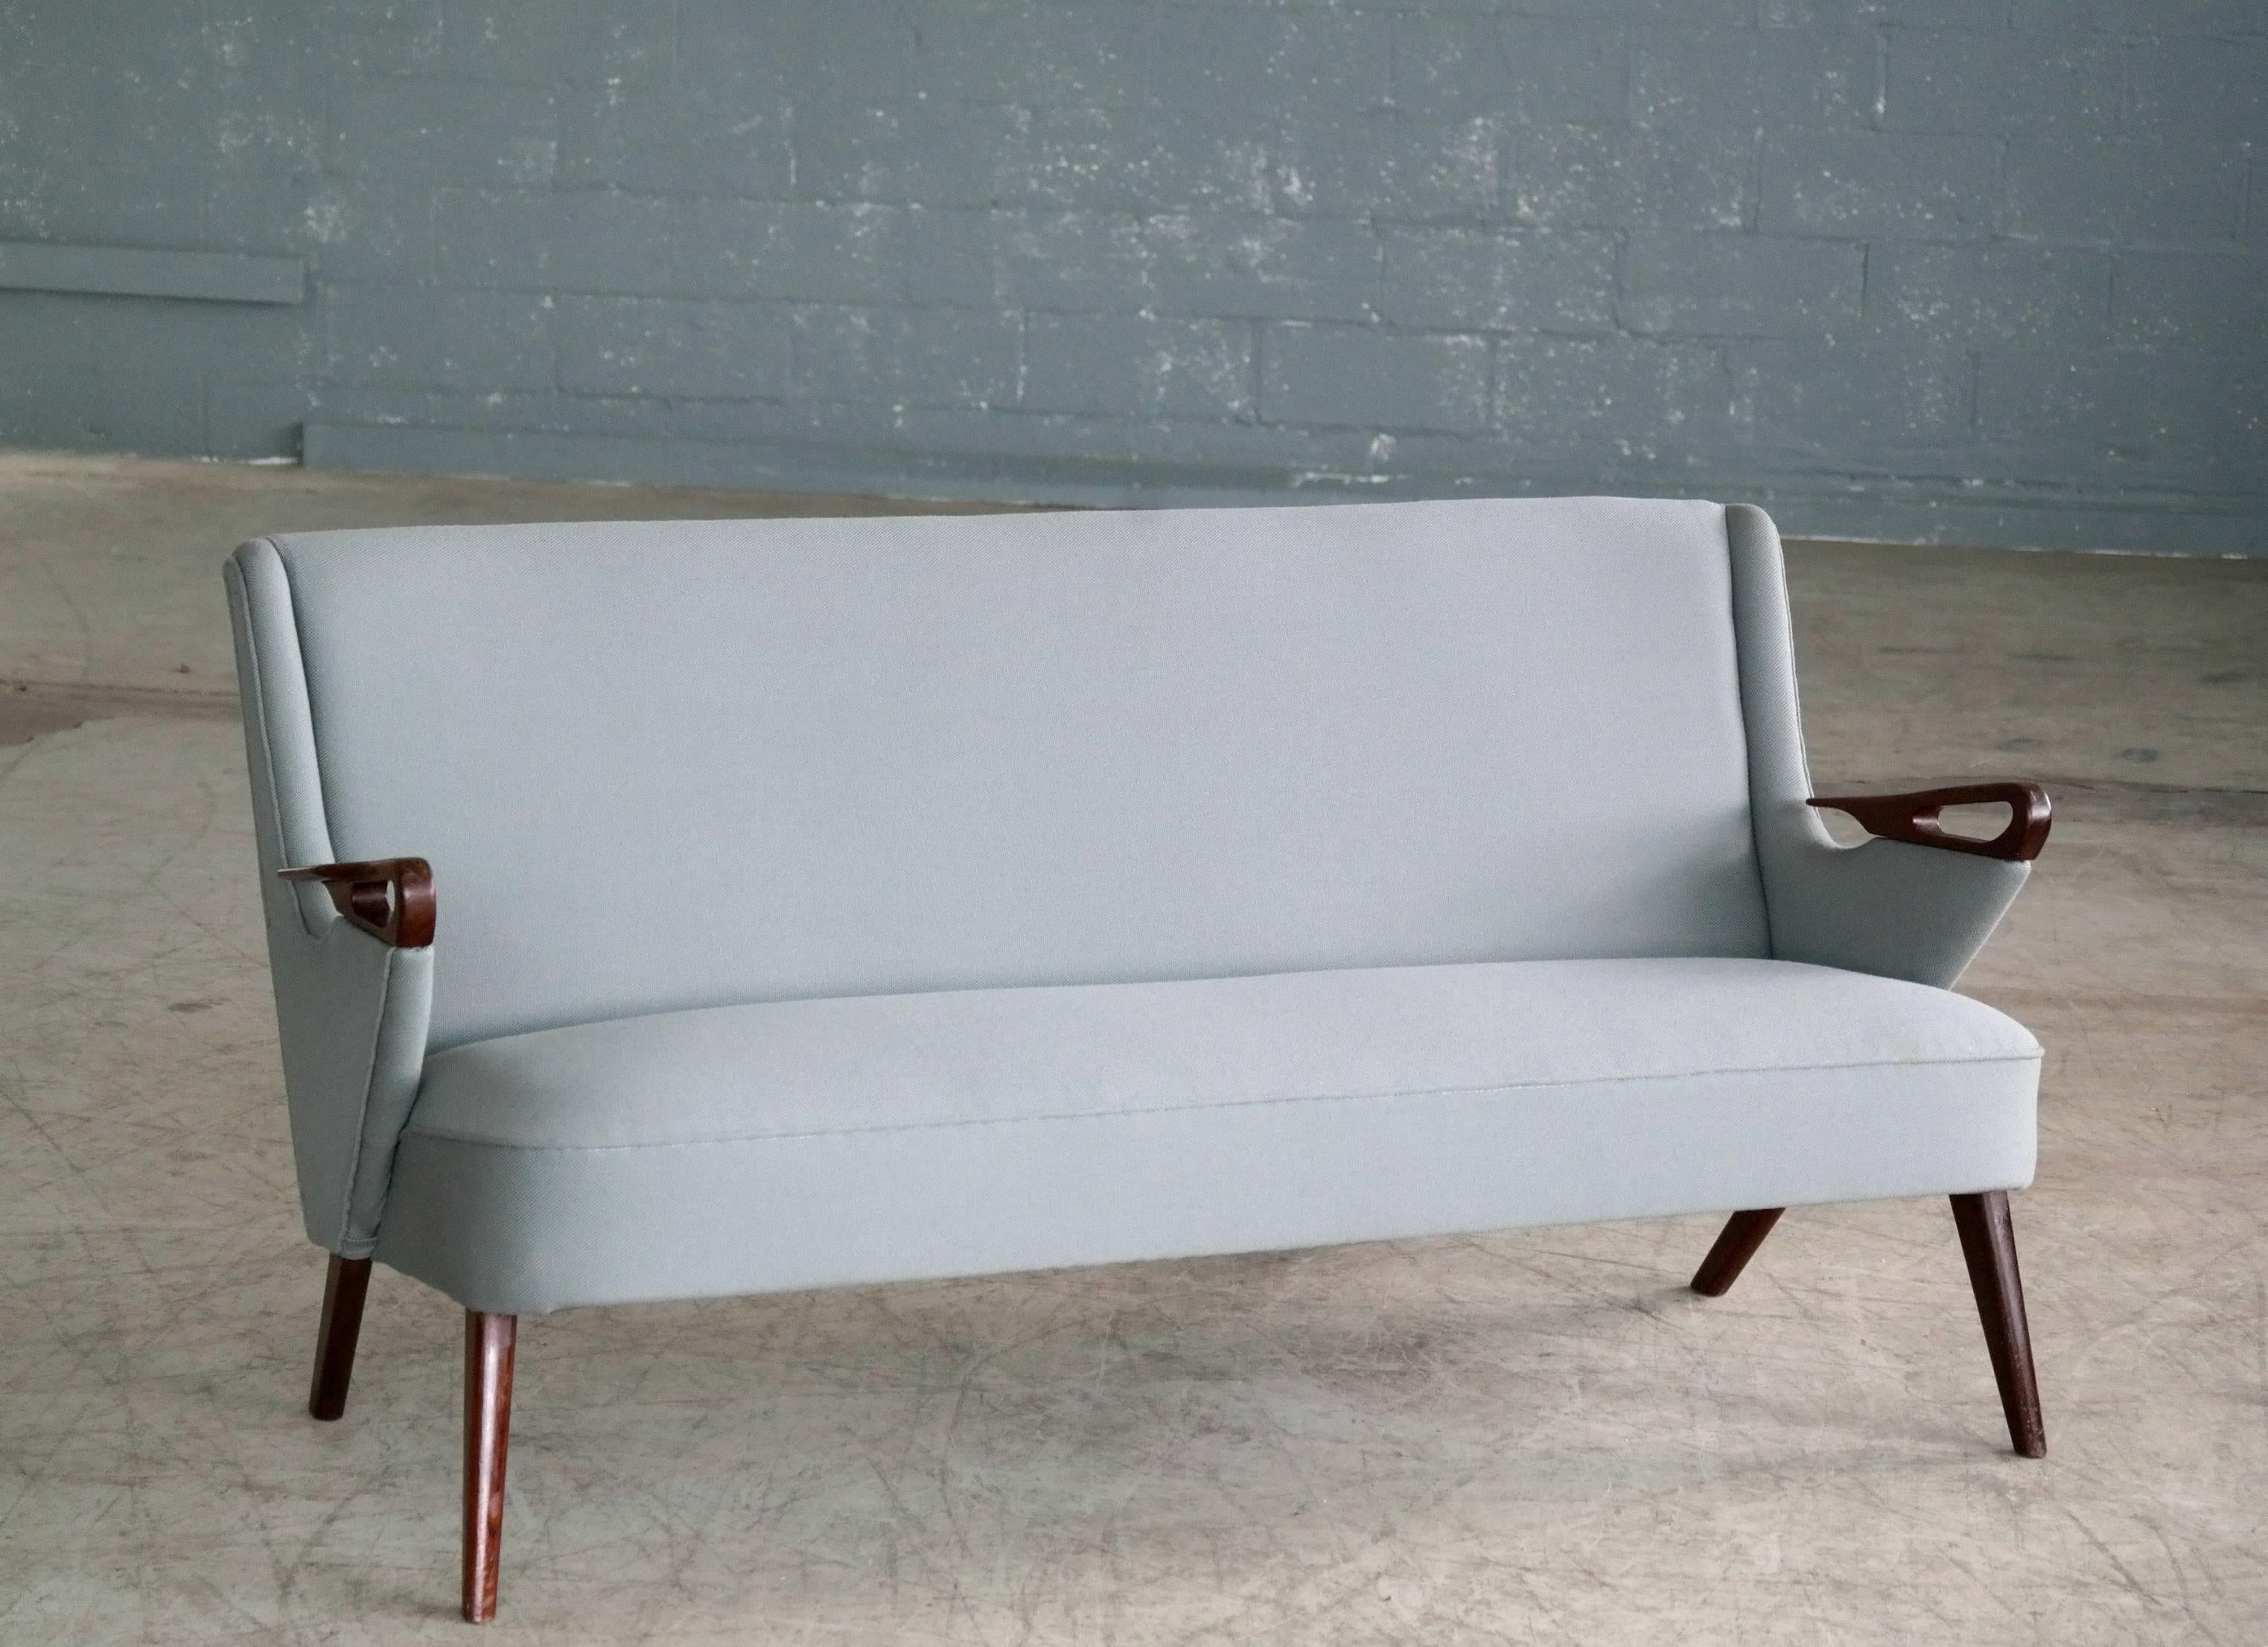 Very rare and simply stunning 1950s sofa attributed to Sven Skipper. The beautifully sculpted armrests in teak evoke images of the great American automobile designs of the 1950s while the sofa with it's slim elegant design handles more like an